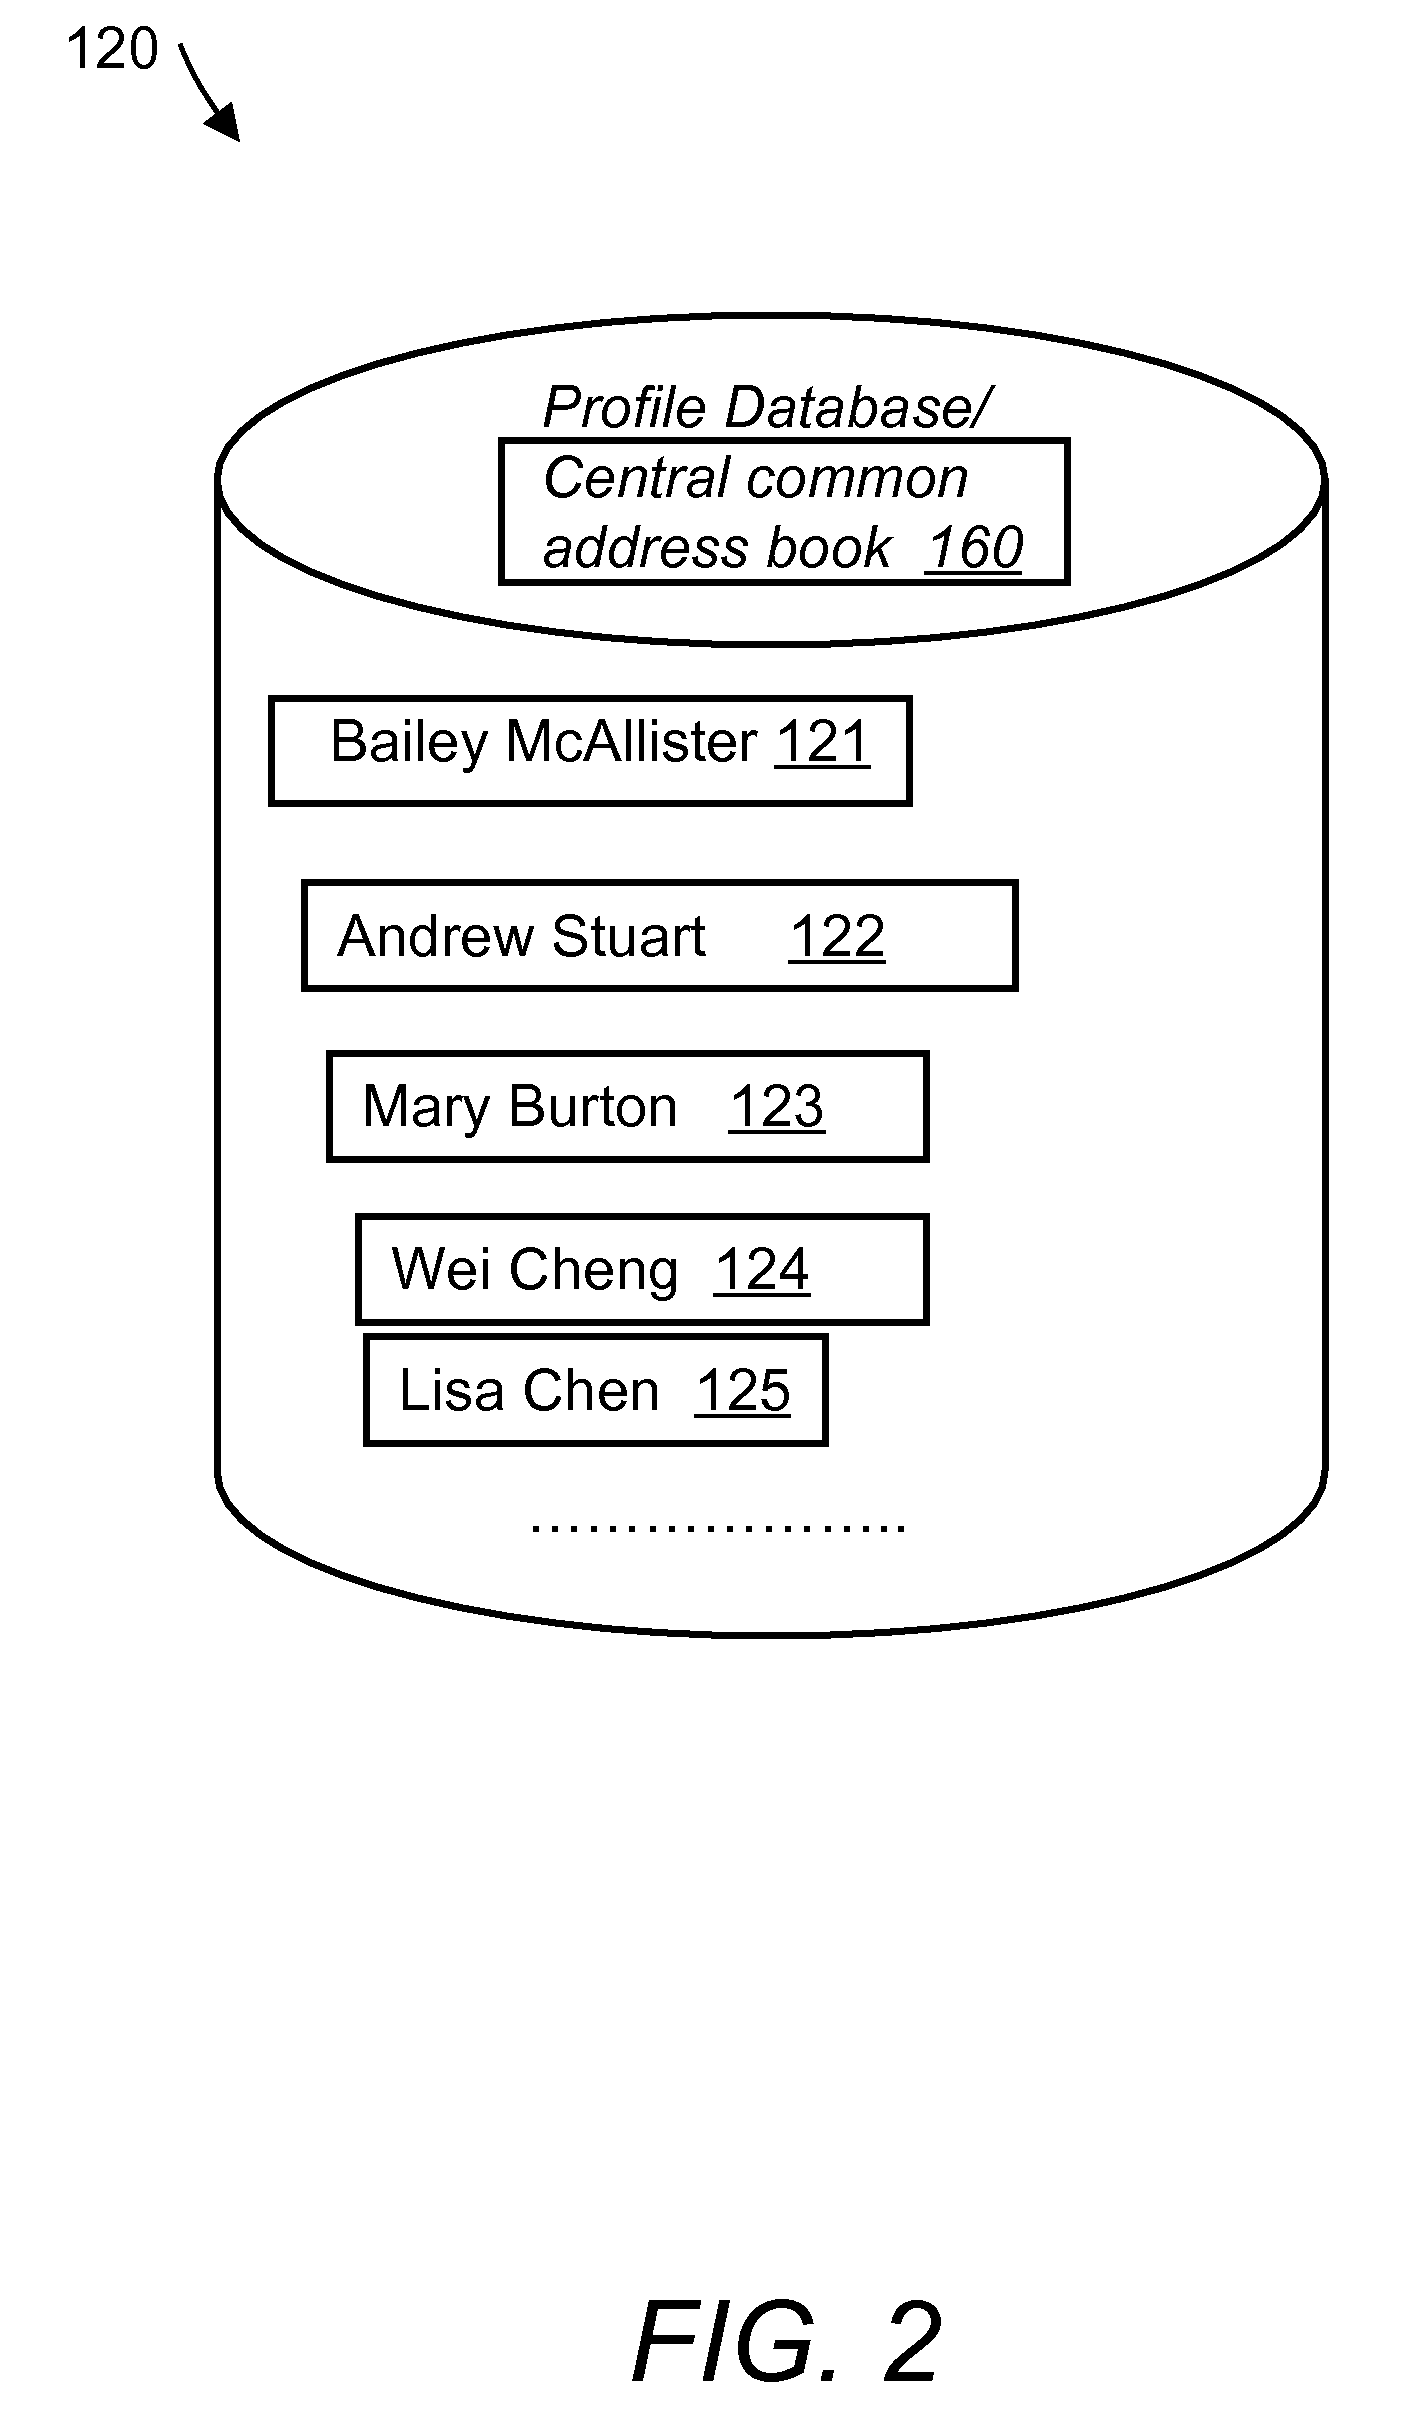 System and method for a web-based address book